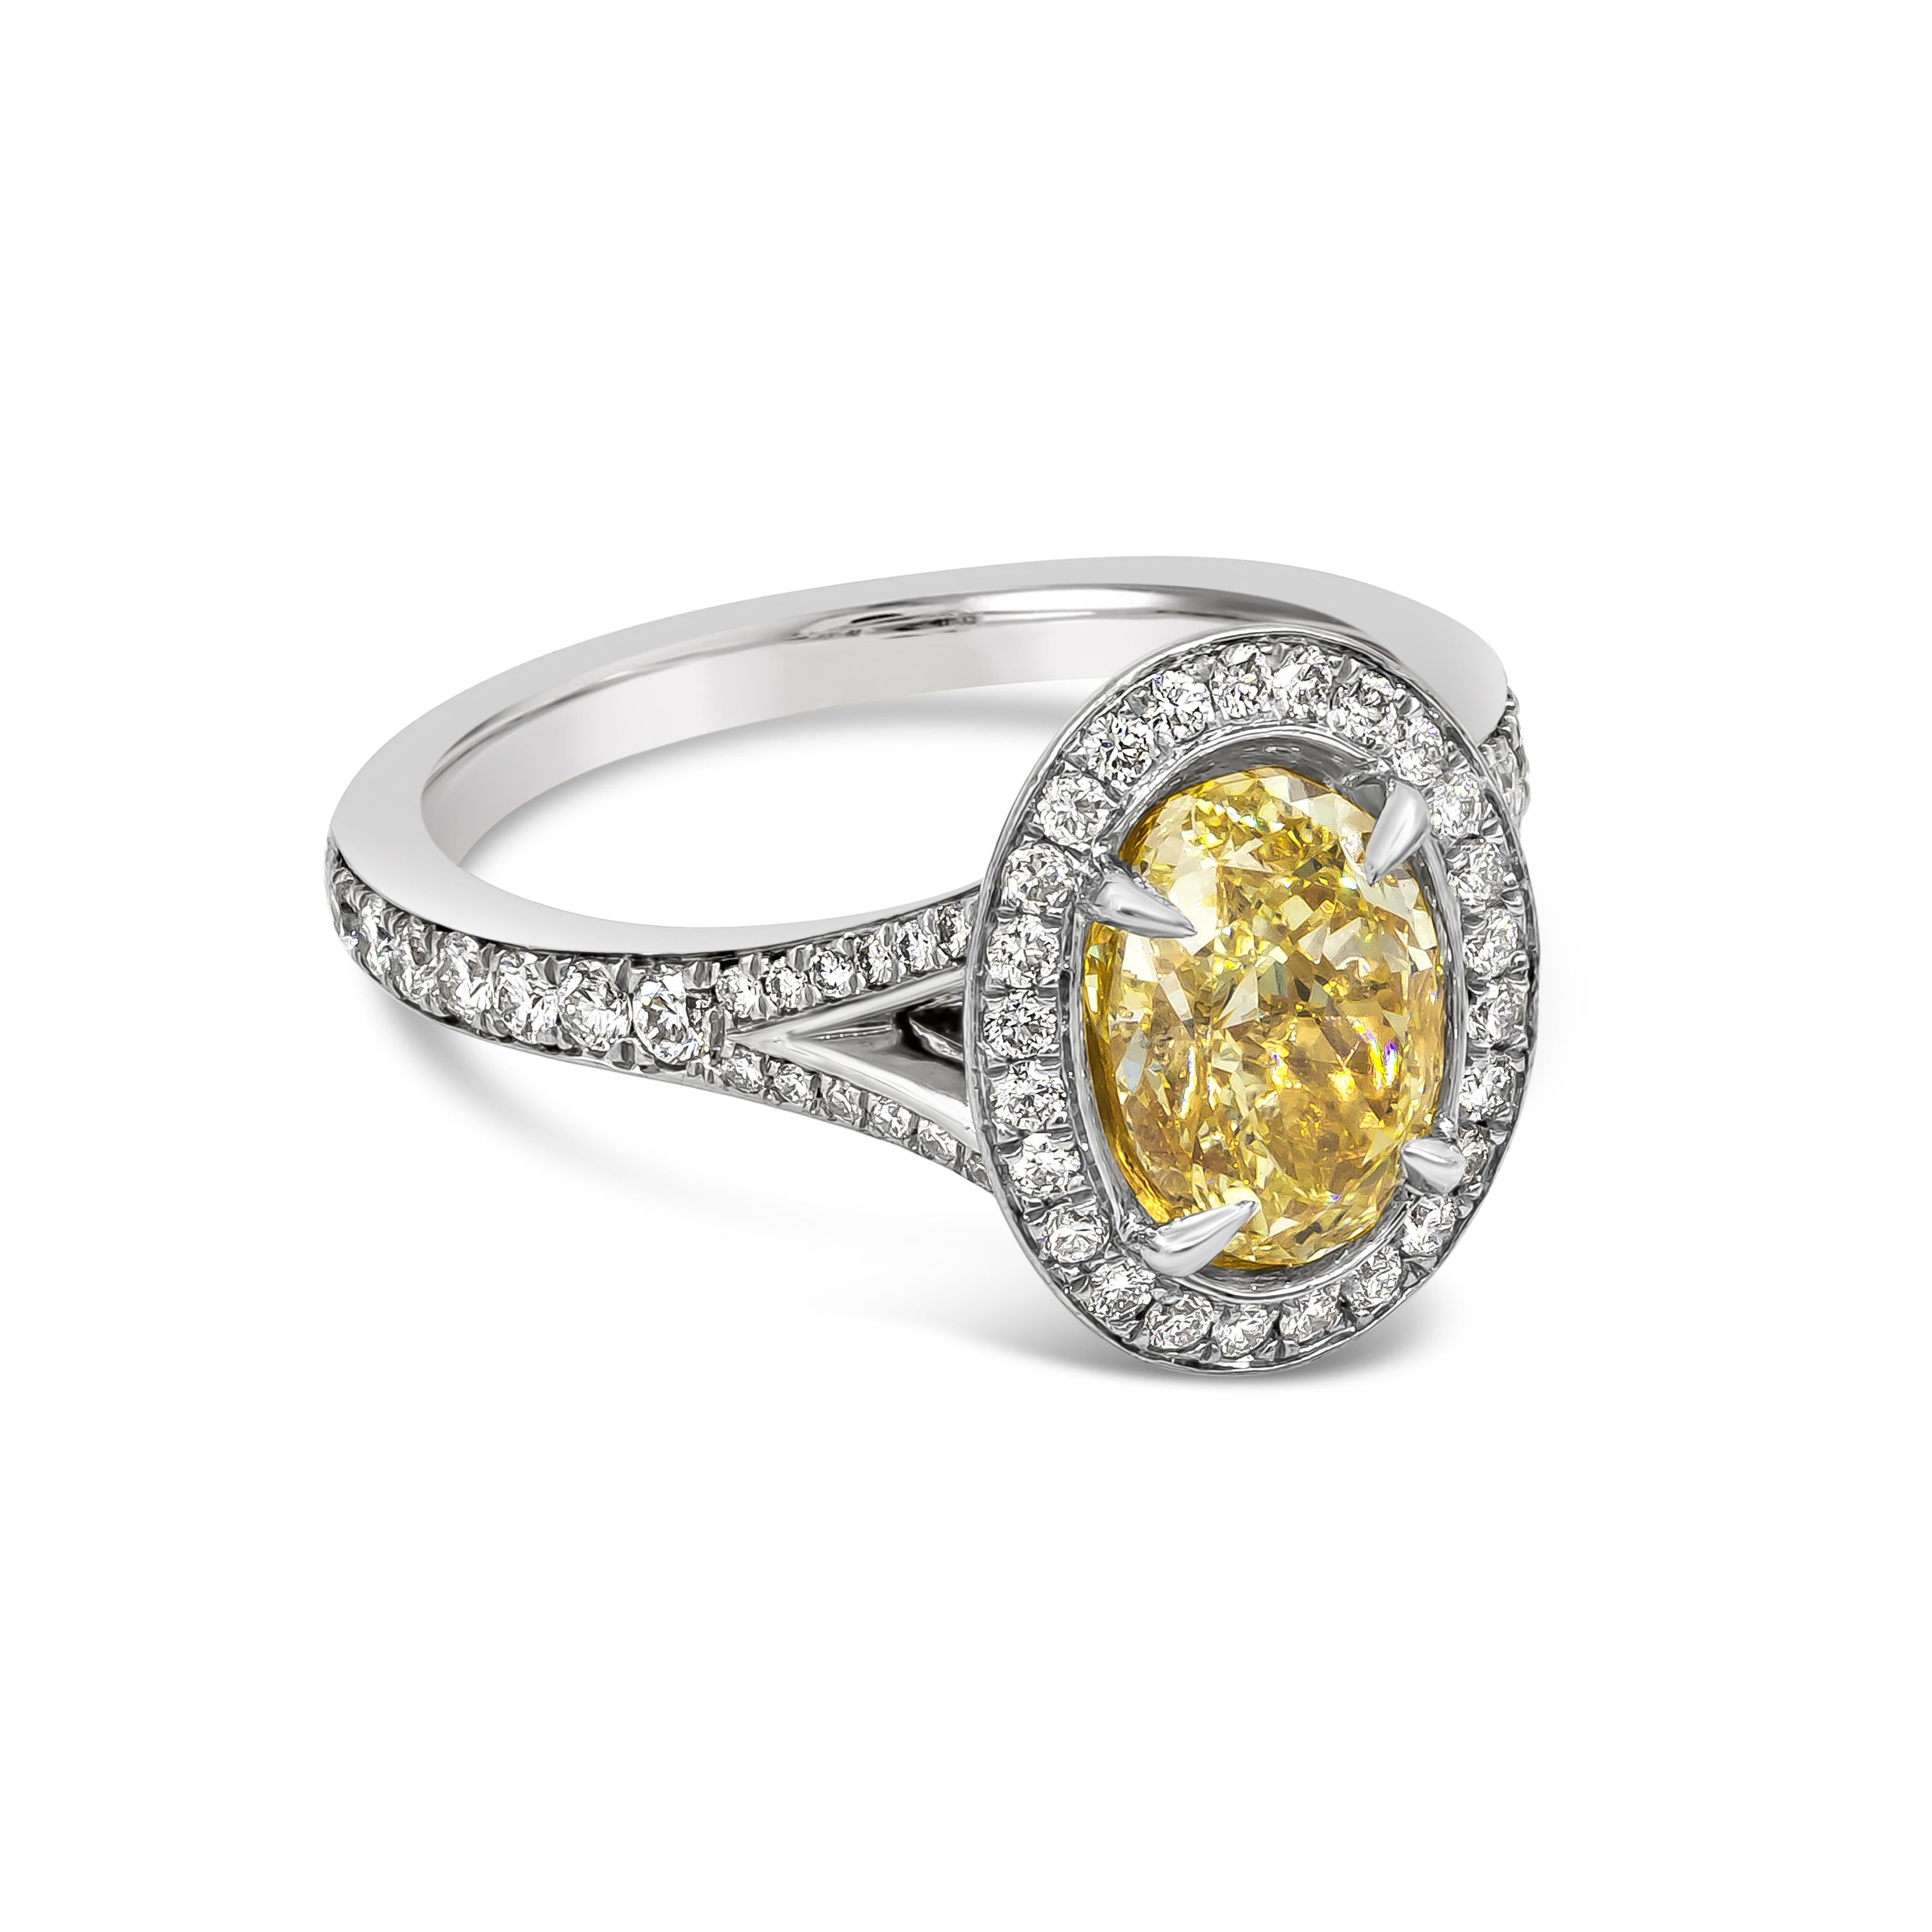 A gorgeous engagement ring, featuring a color-rich 1.76 carats oval cut diamond certified by GIA as Fancy Light Yellow color and VS2 clarity. Surrounded by a single row of round brilliant cut diamonds in a halo bezel setting. Set on a split-shank